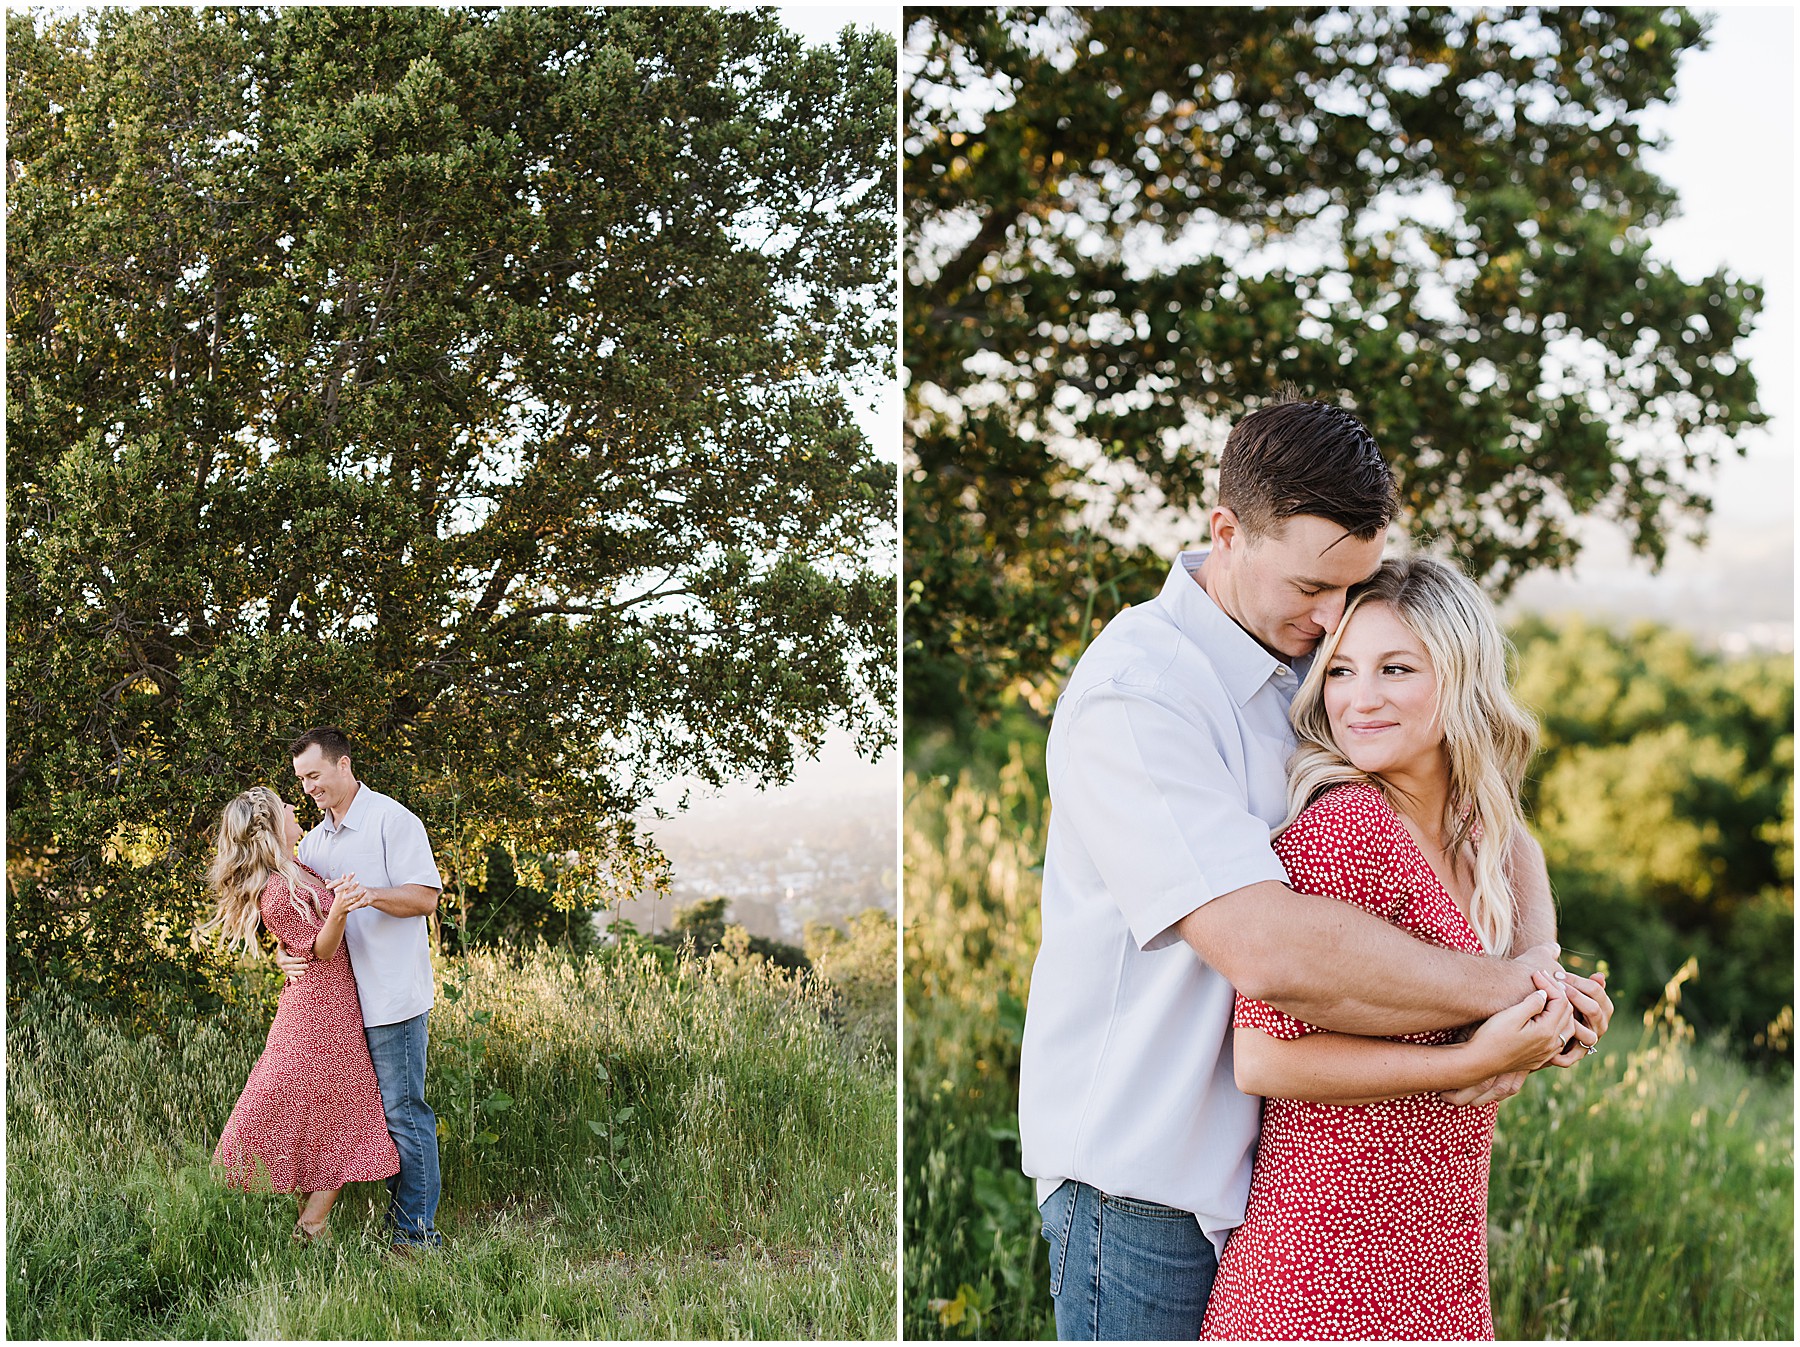 Spring Engagement Session in San Luis Obispo, California at Terrace Hill